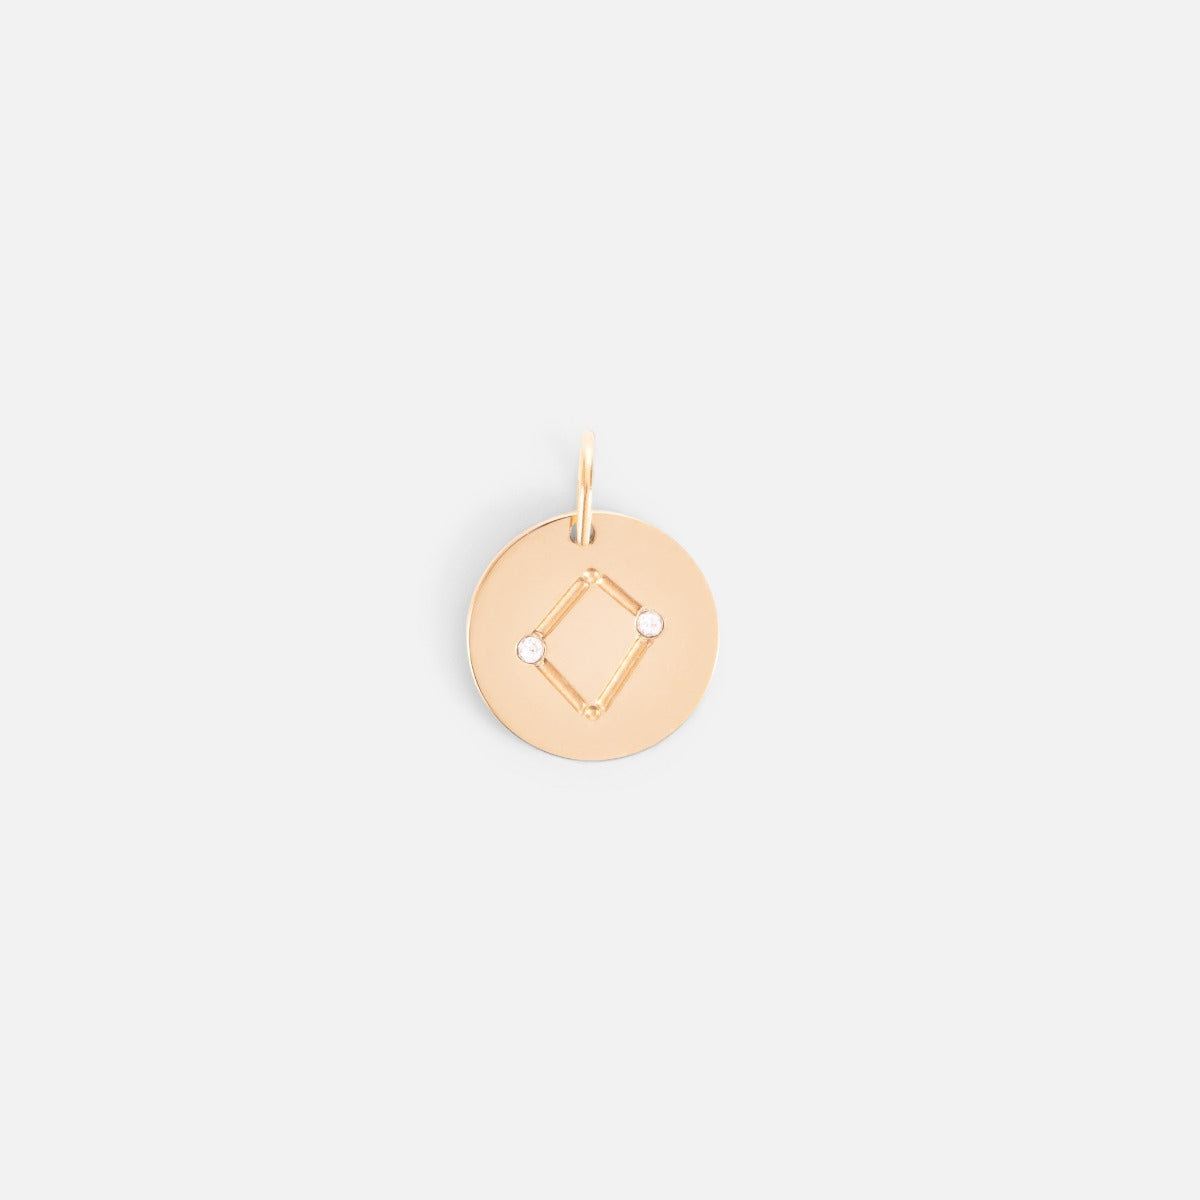 Small golden charm engraved with the zodiac constellation "libra"